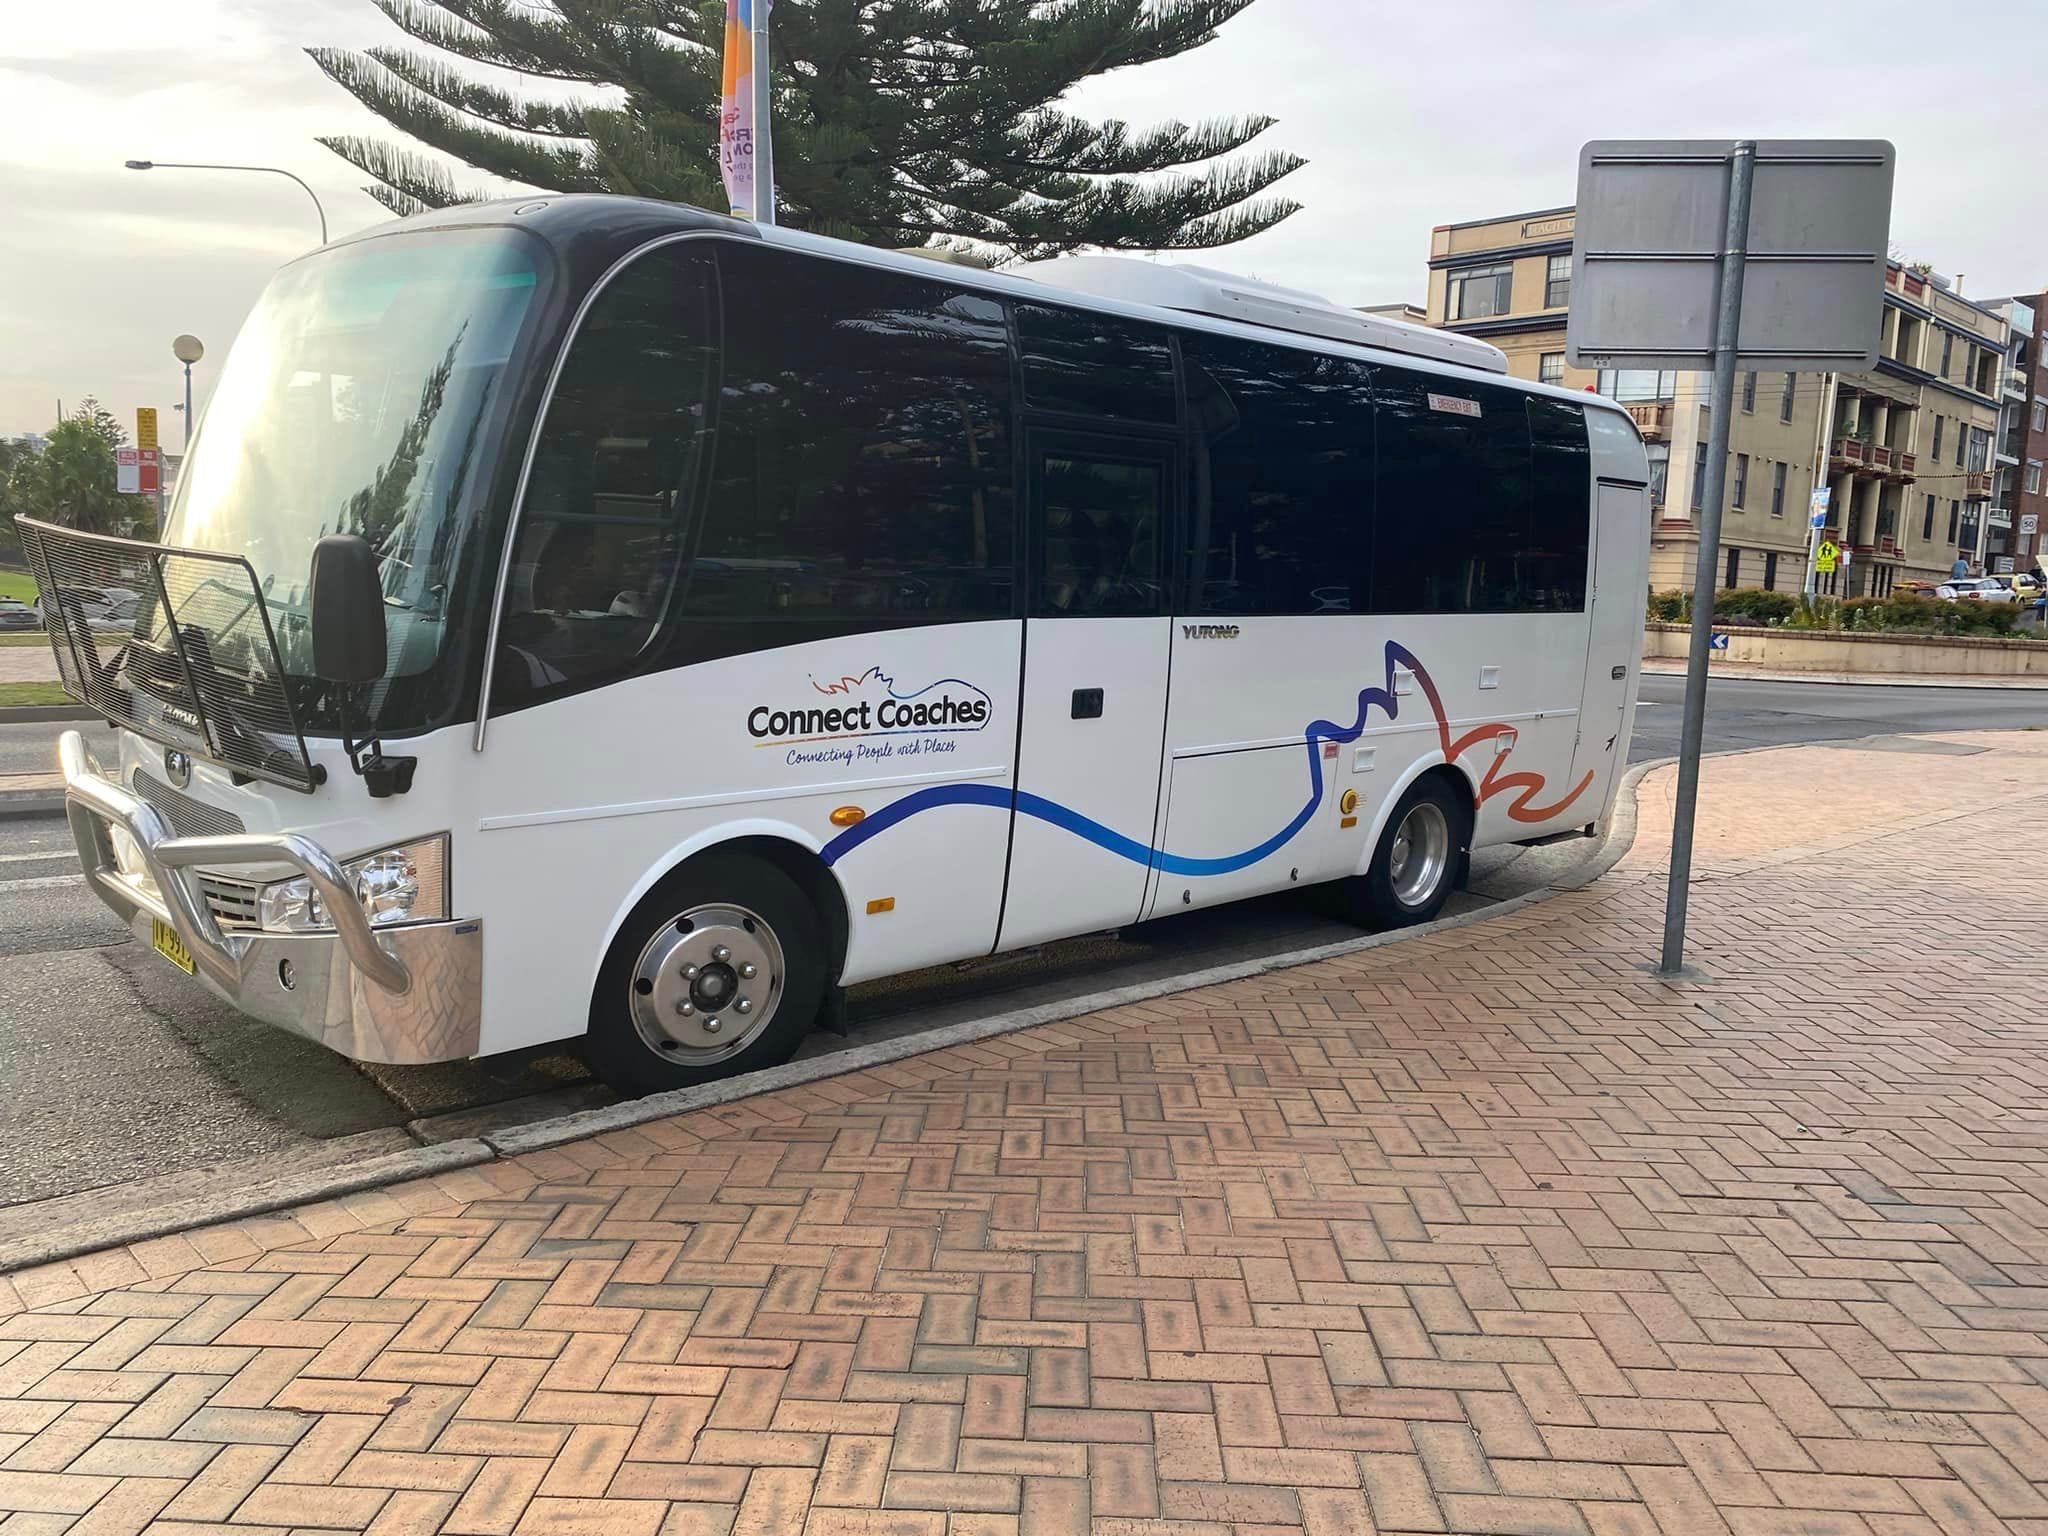 Connect Coaches - Connecting People With Places Image -659241f5463cb